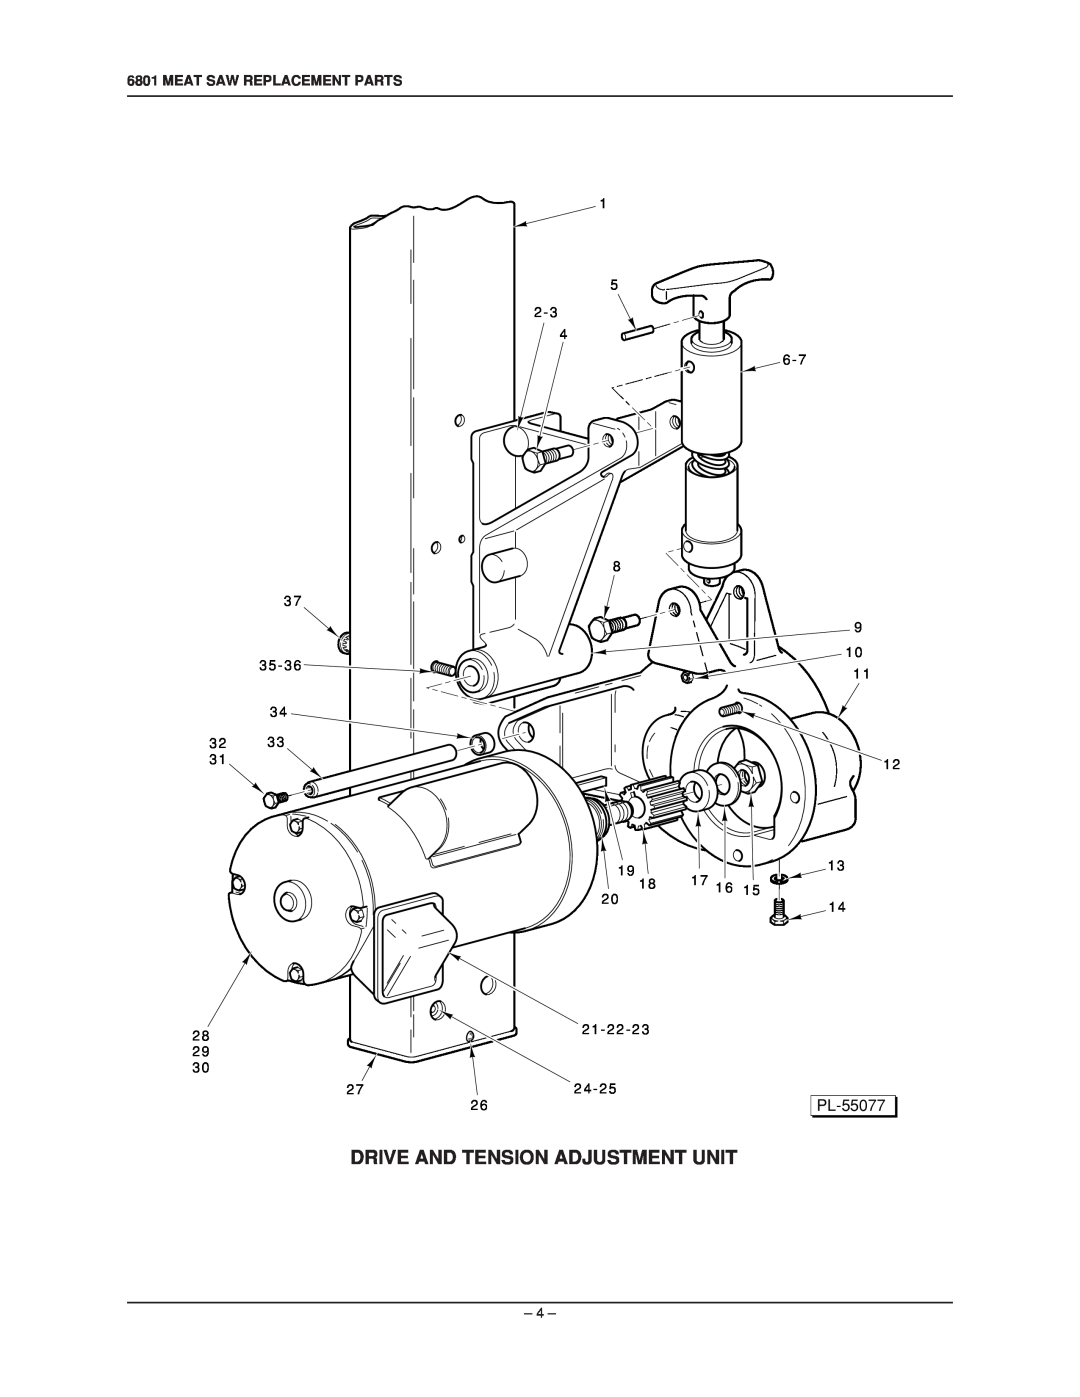 Hobart 6801 manual Drive And Tension Adjustment Unit, PL-55077, Meat Saw Replacement Parts 